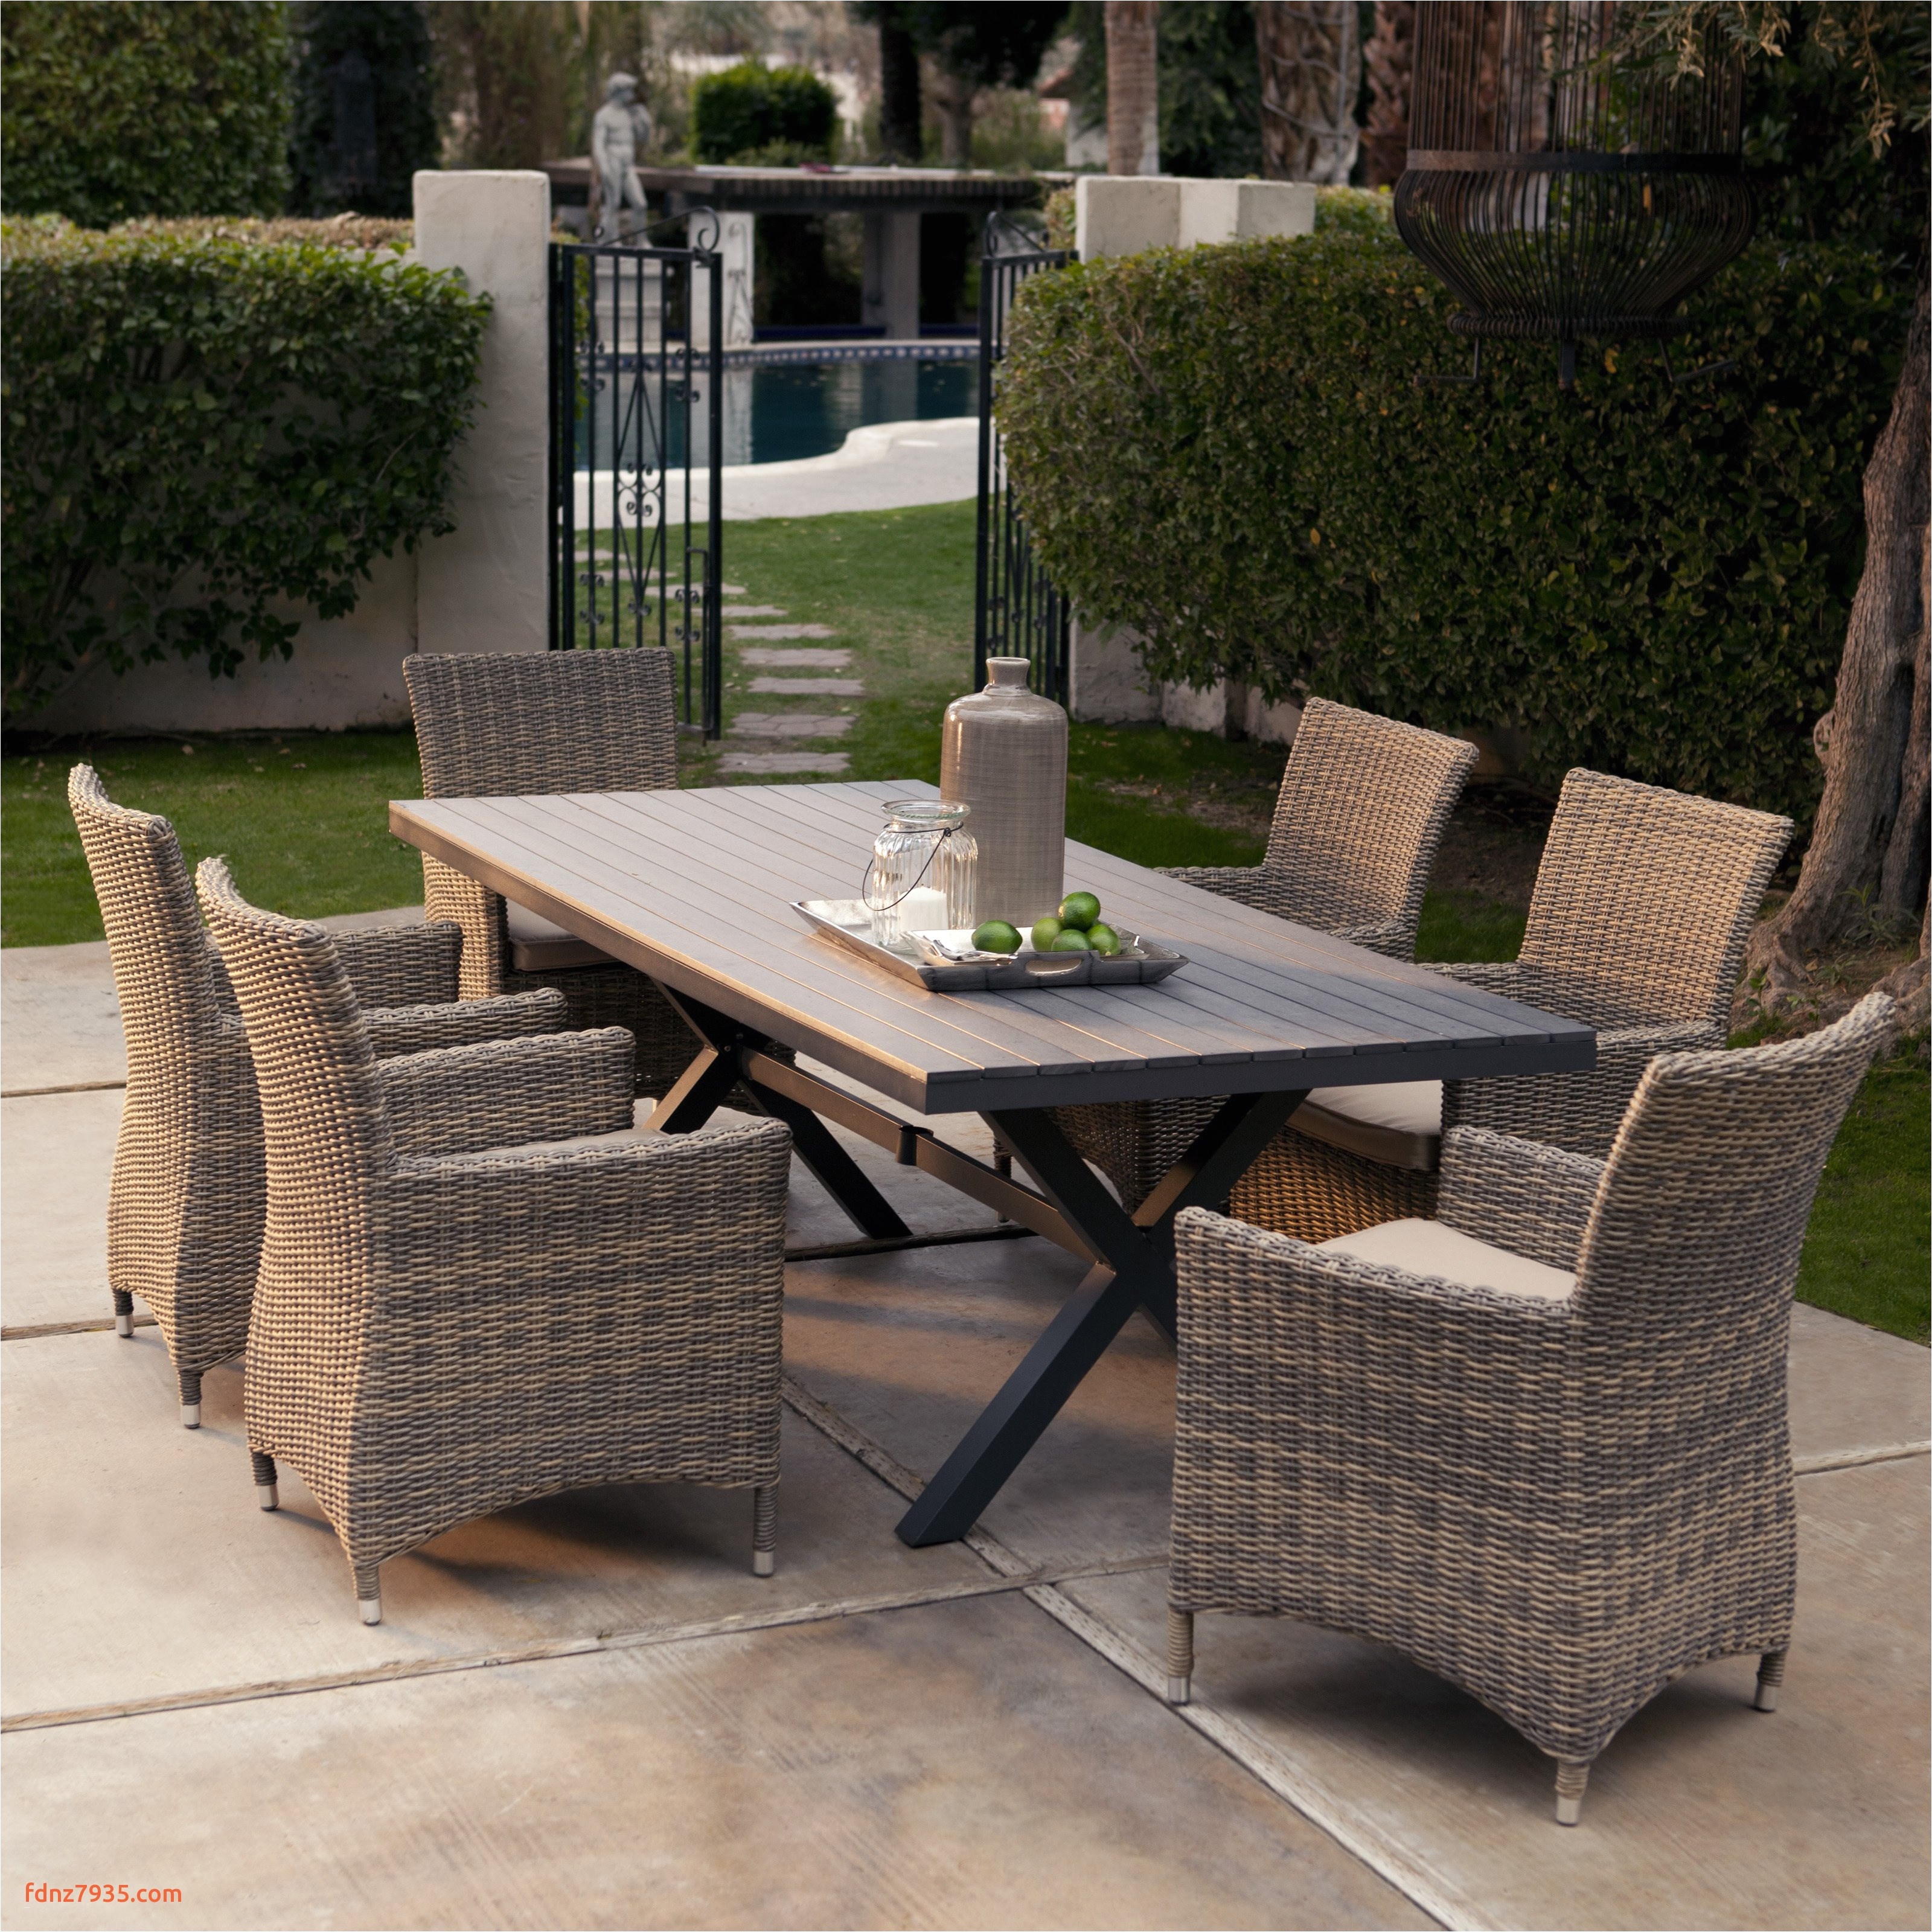 stone top dining table awesome chair outdoor patio furniture marvellous wicker outdoor sofa 0d